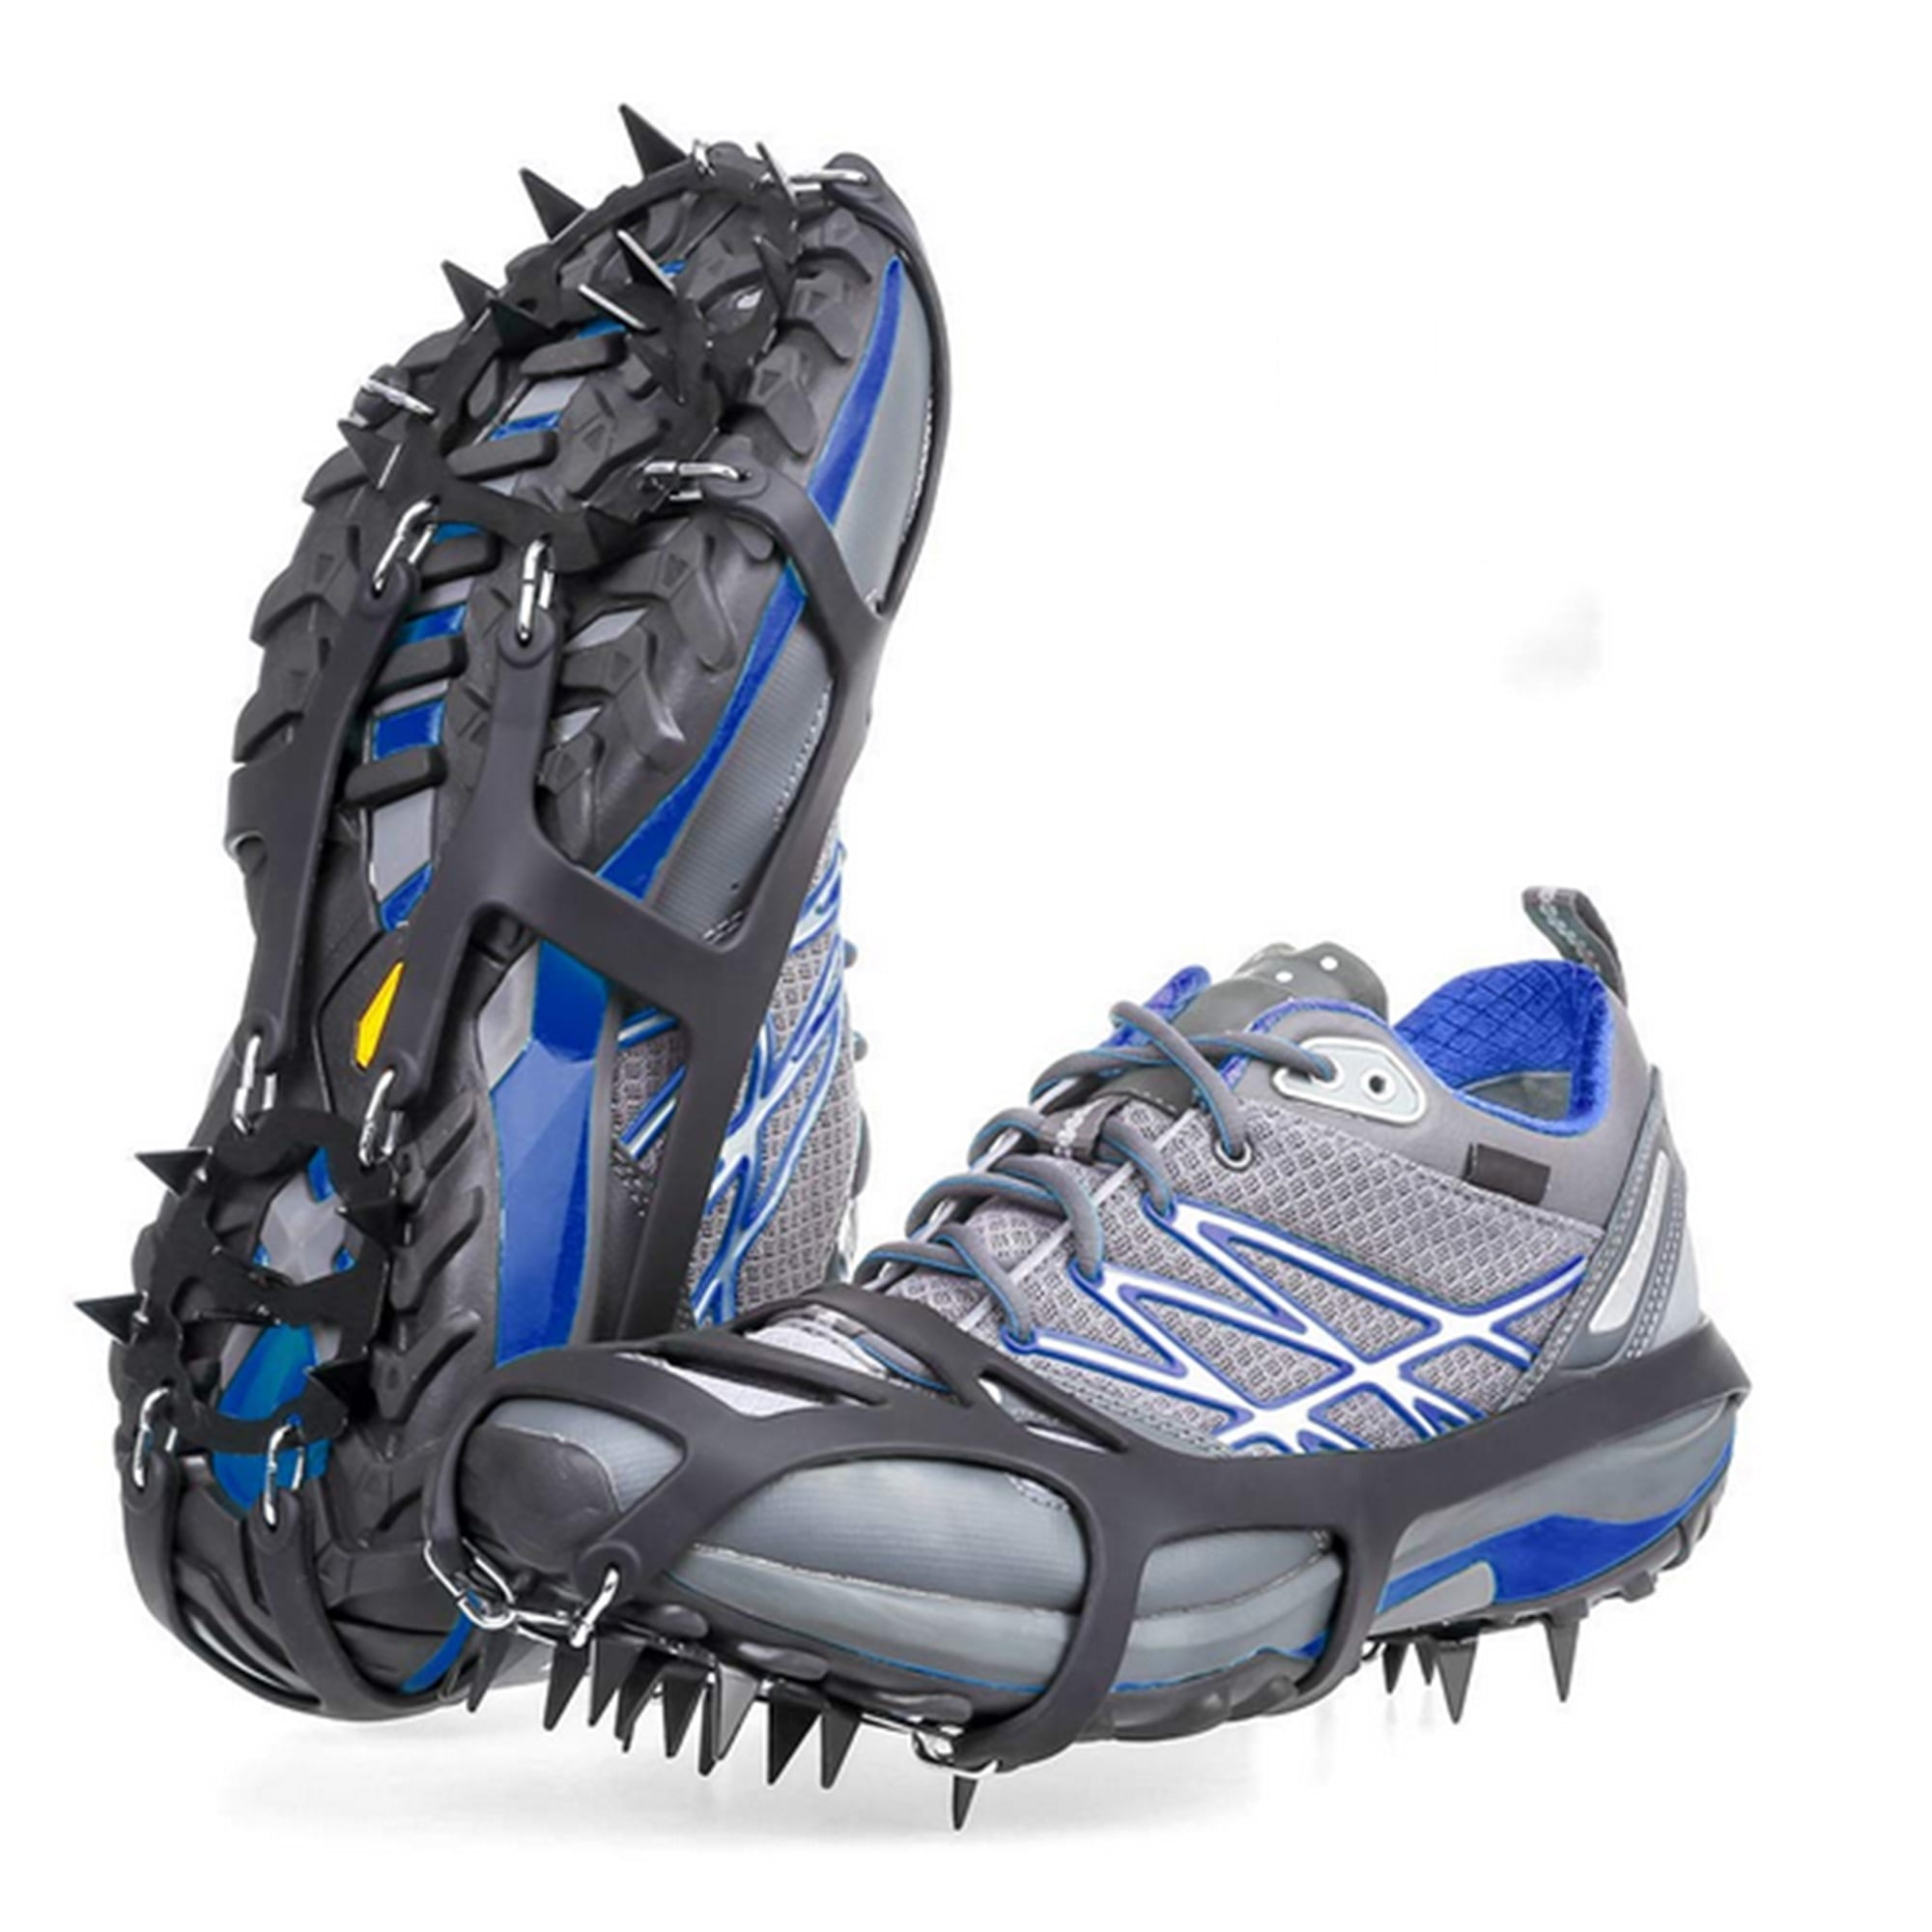 JCR Snow Ice Crampons Antislip Ice Cleats with Steel Cleats Strong Traction for ICY Road Hiking